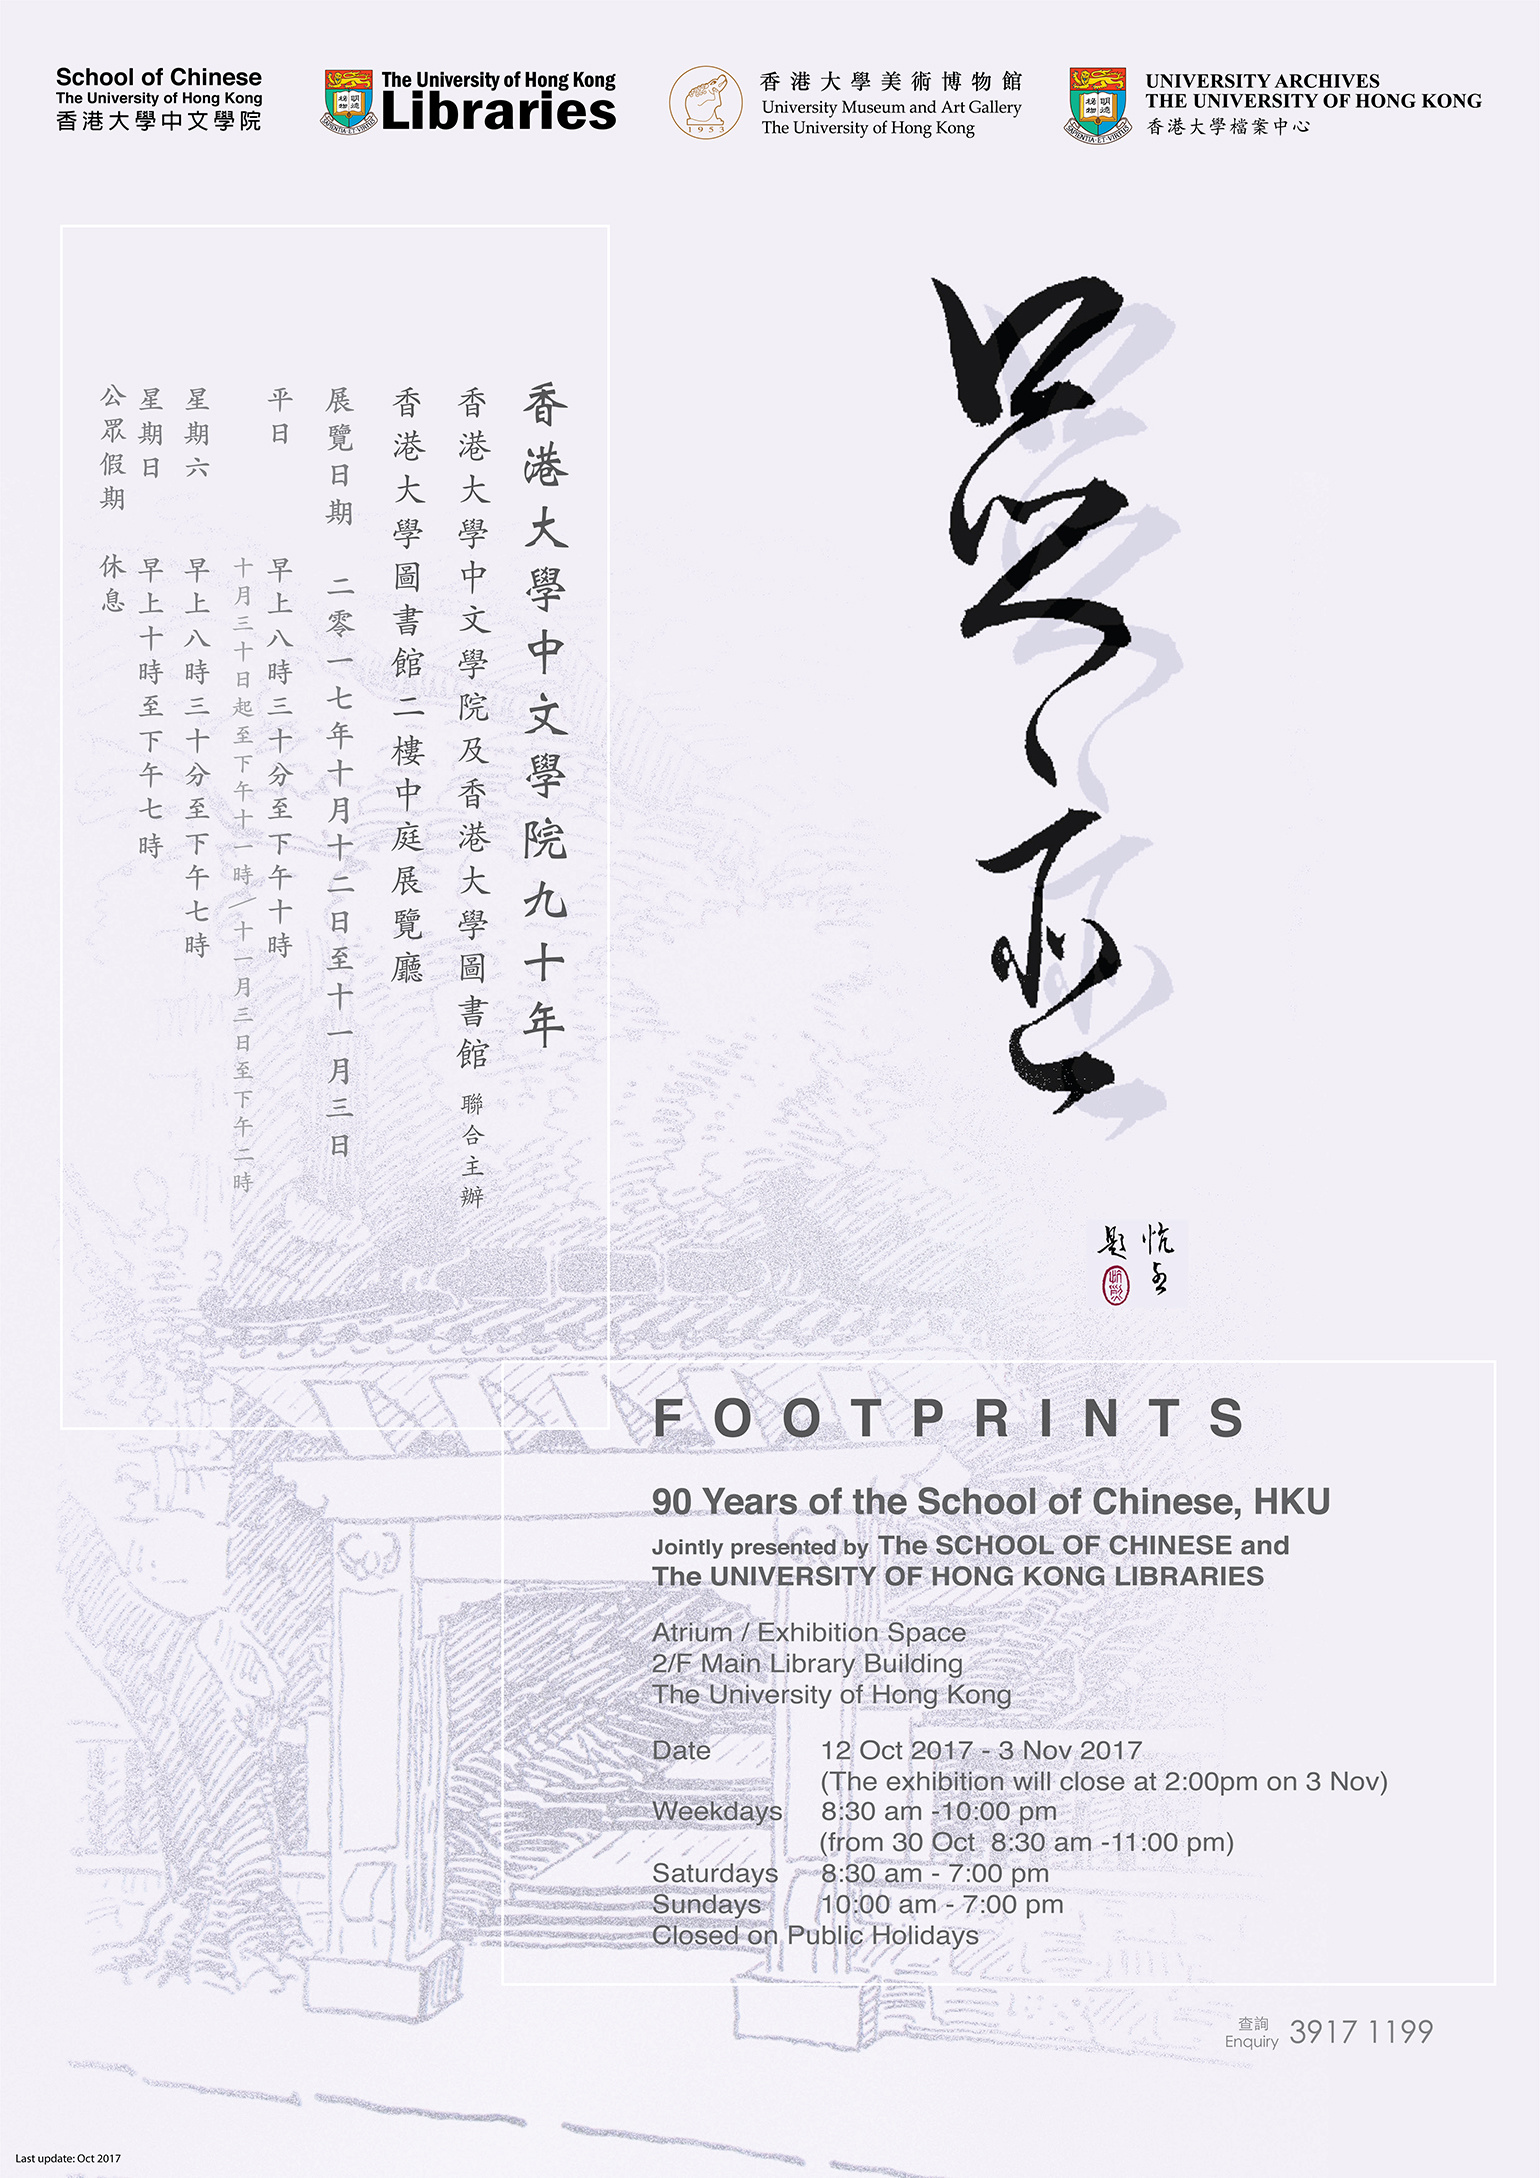 Footprints: 90 Years of the School of Chinese, HKU